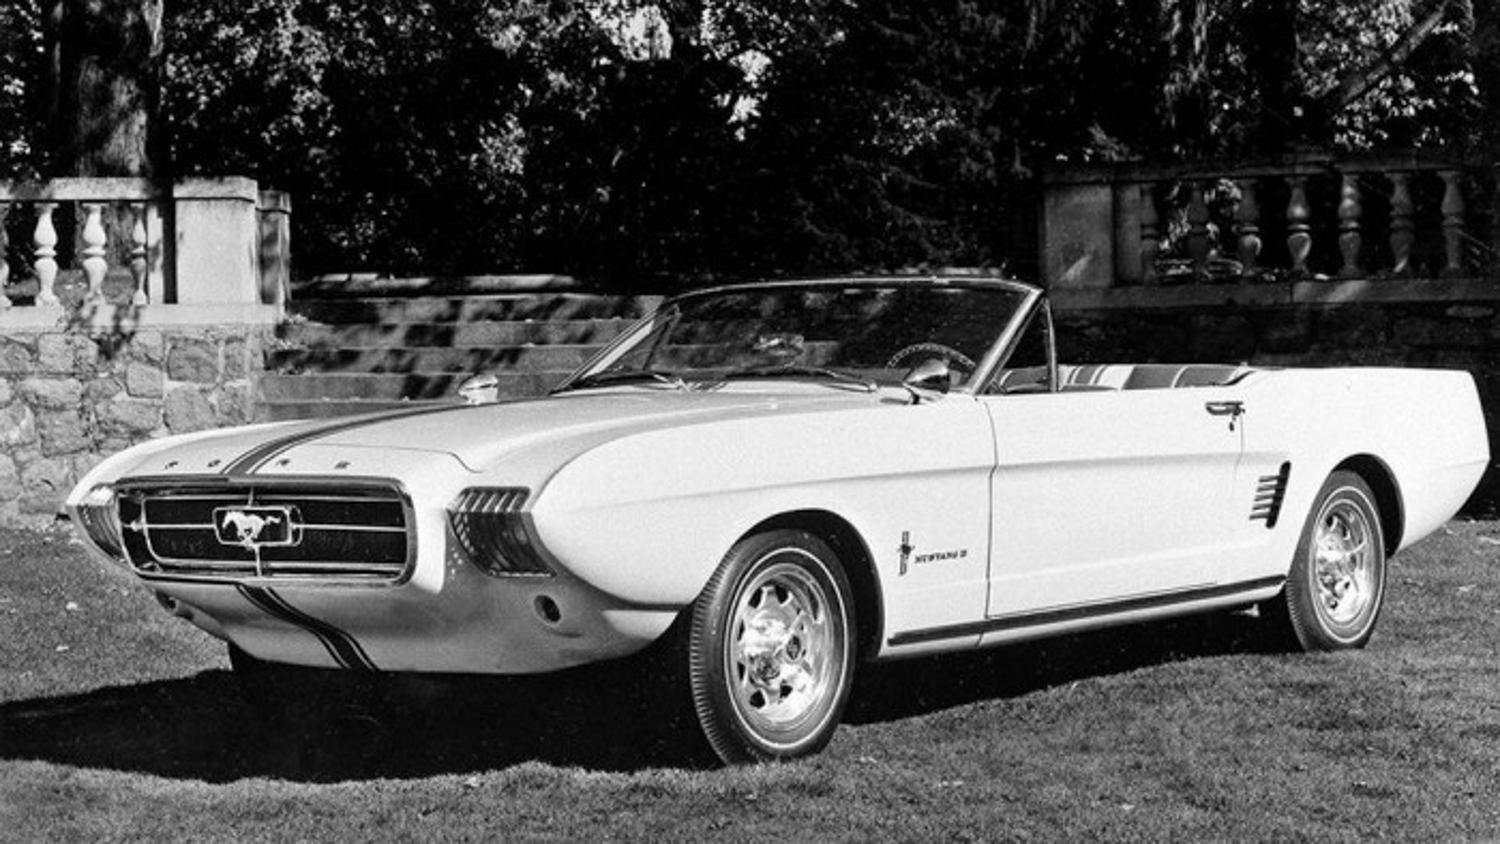 The Mustang II was being shown while the production model was being finalized. 